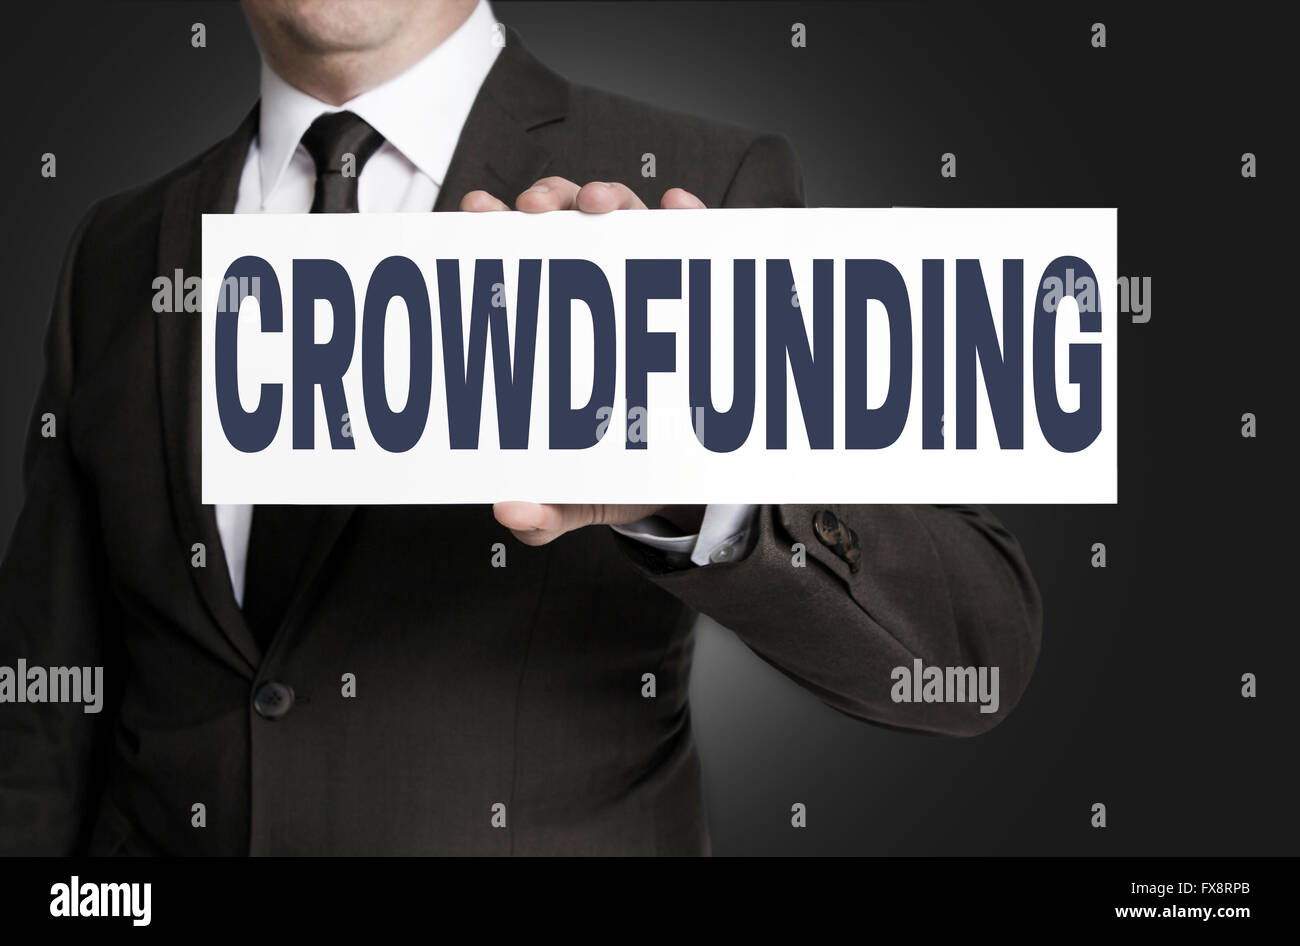 crowdfunding sign is held by businessman. Stock Photo